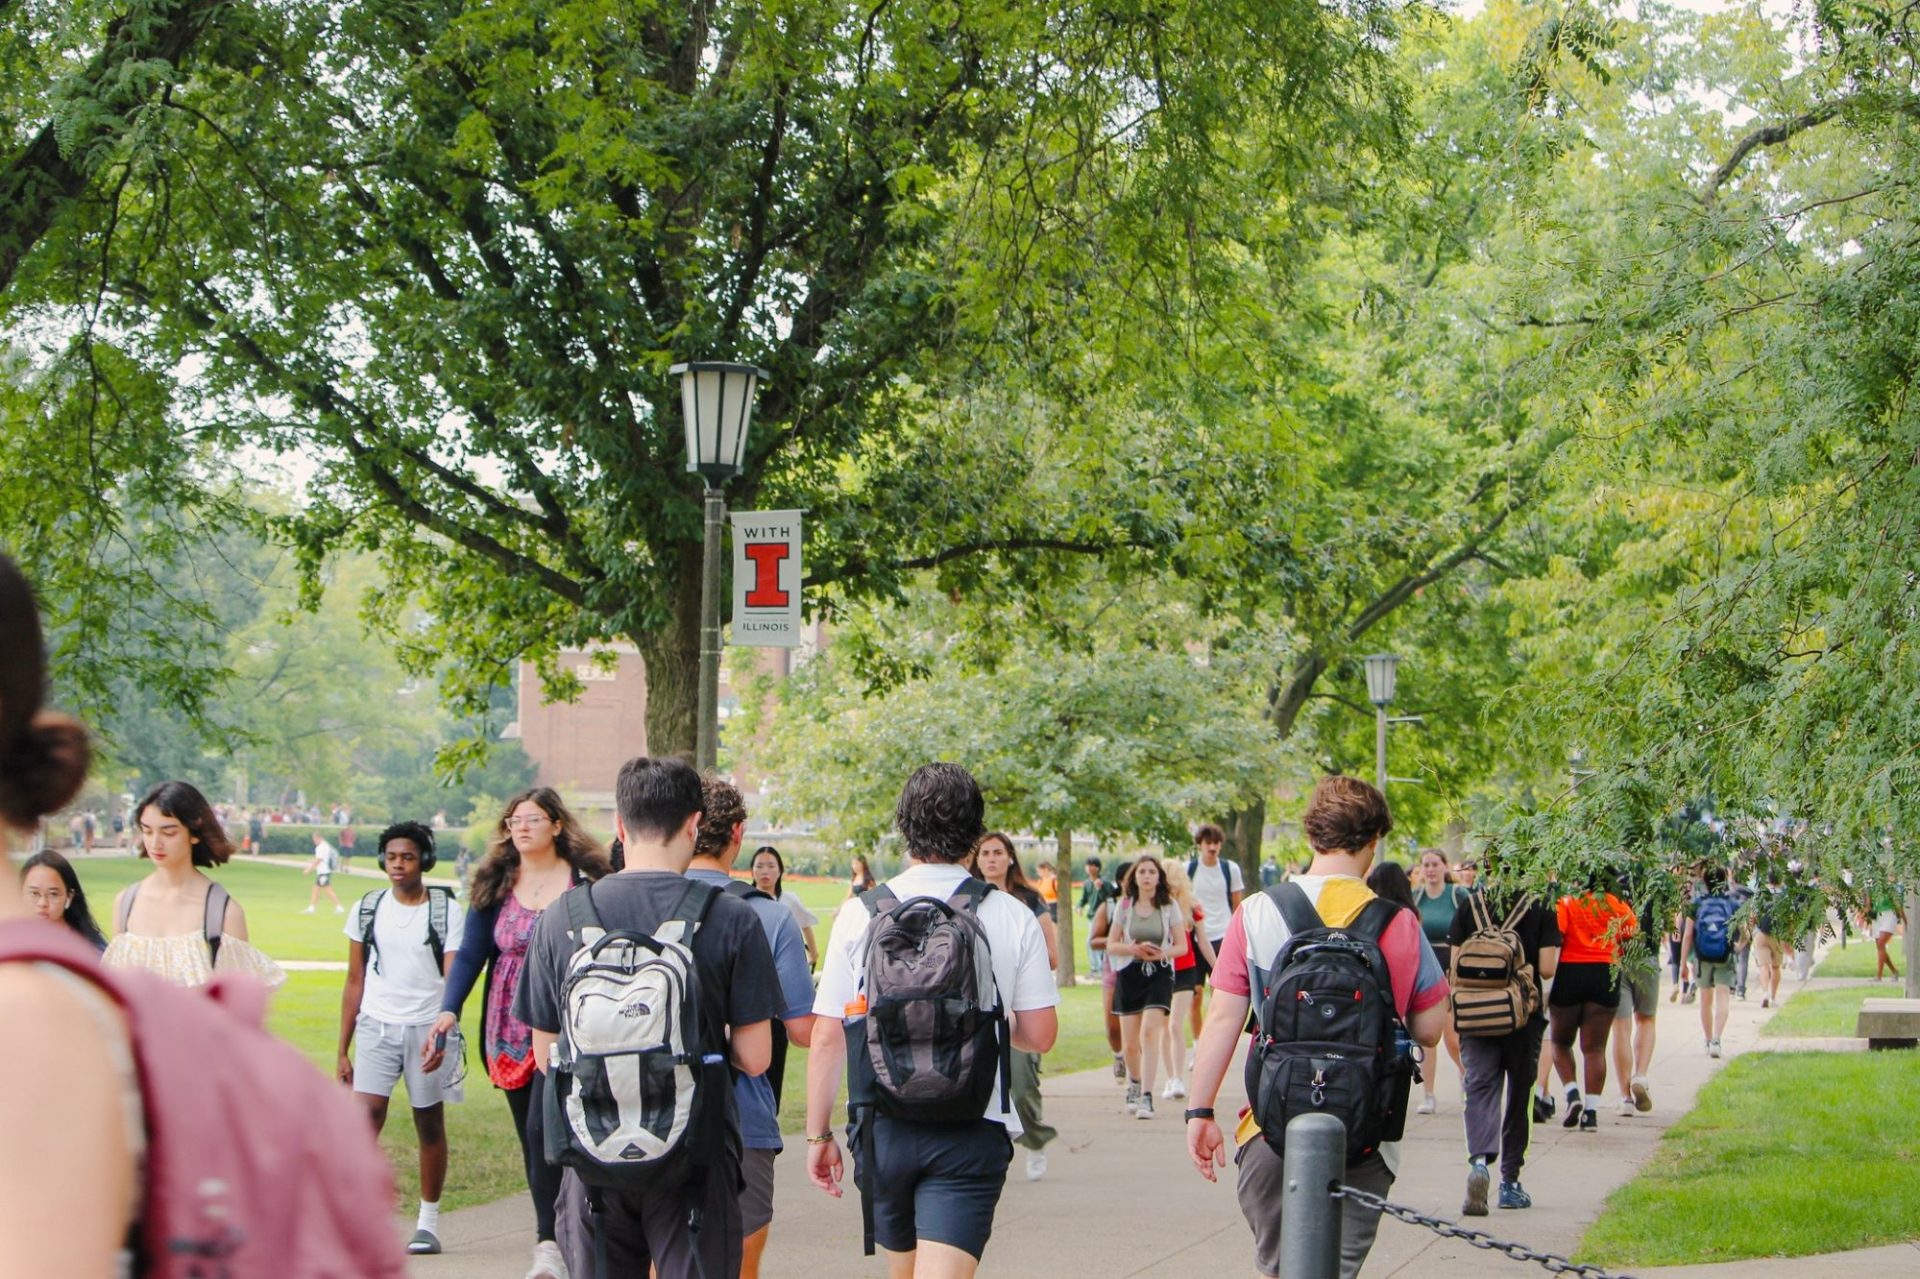 Students, many with backpacks, fill a sidewalk on the quad. The sidewalk is lined with trees.